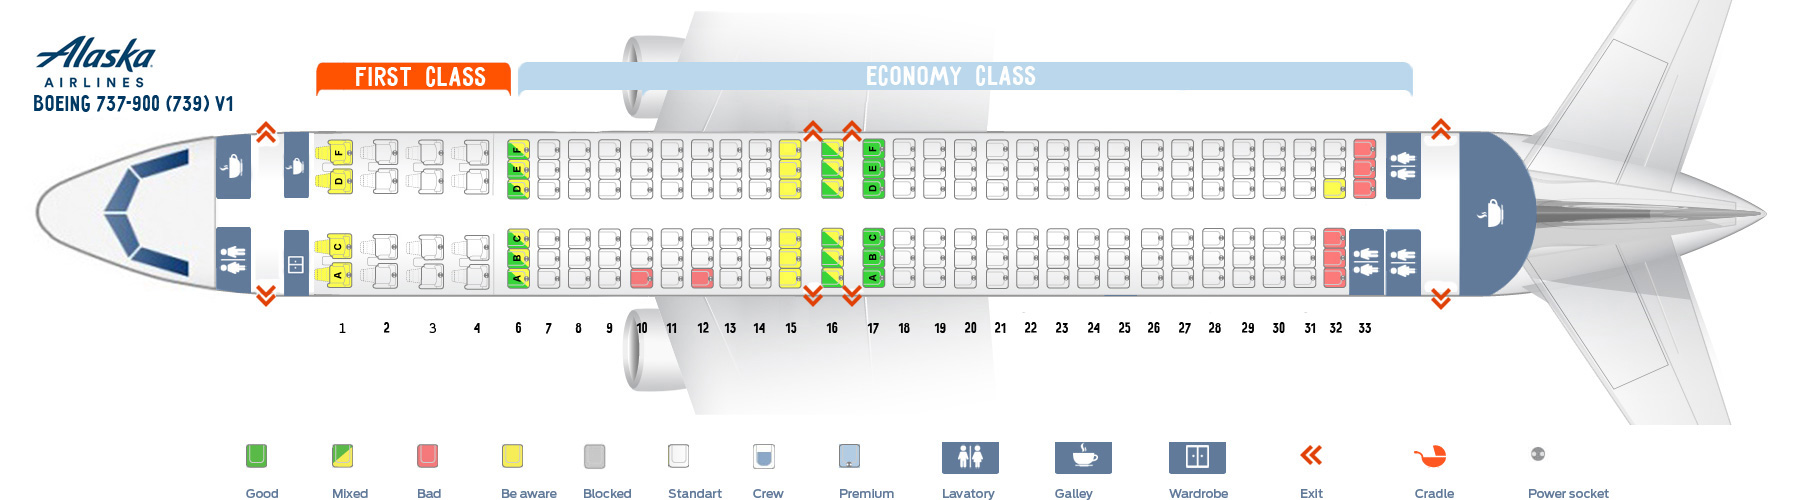 Seating Chart For Alaska Airlines